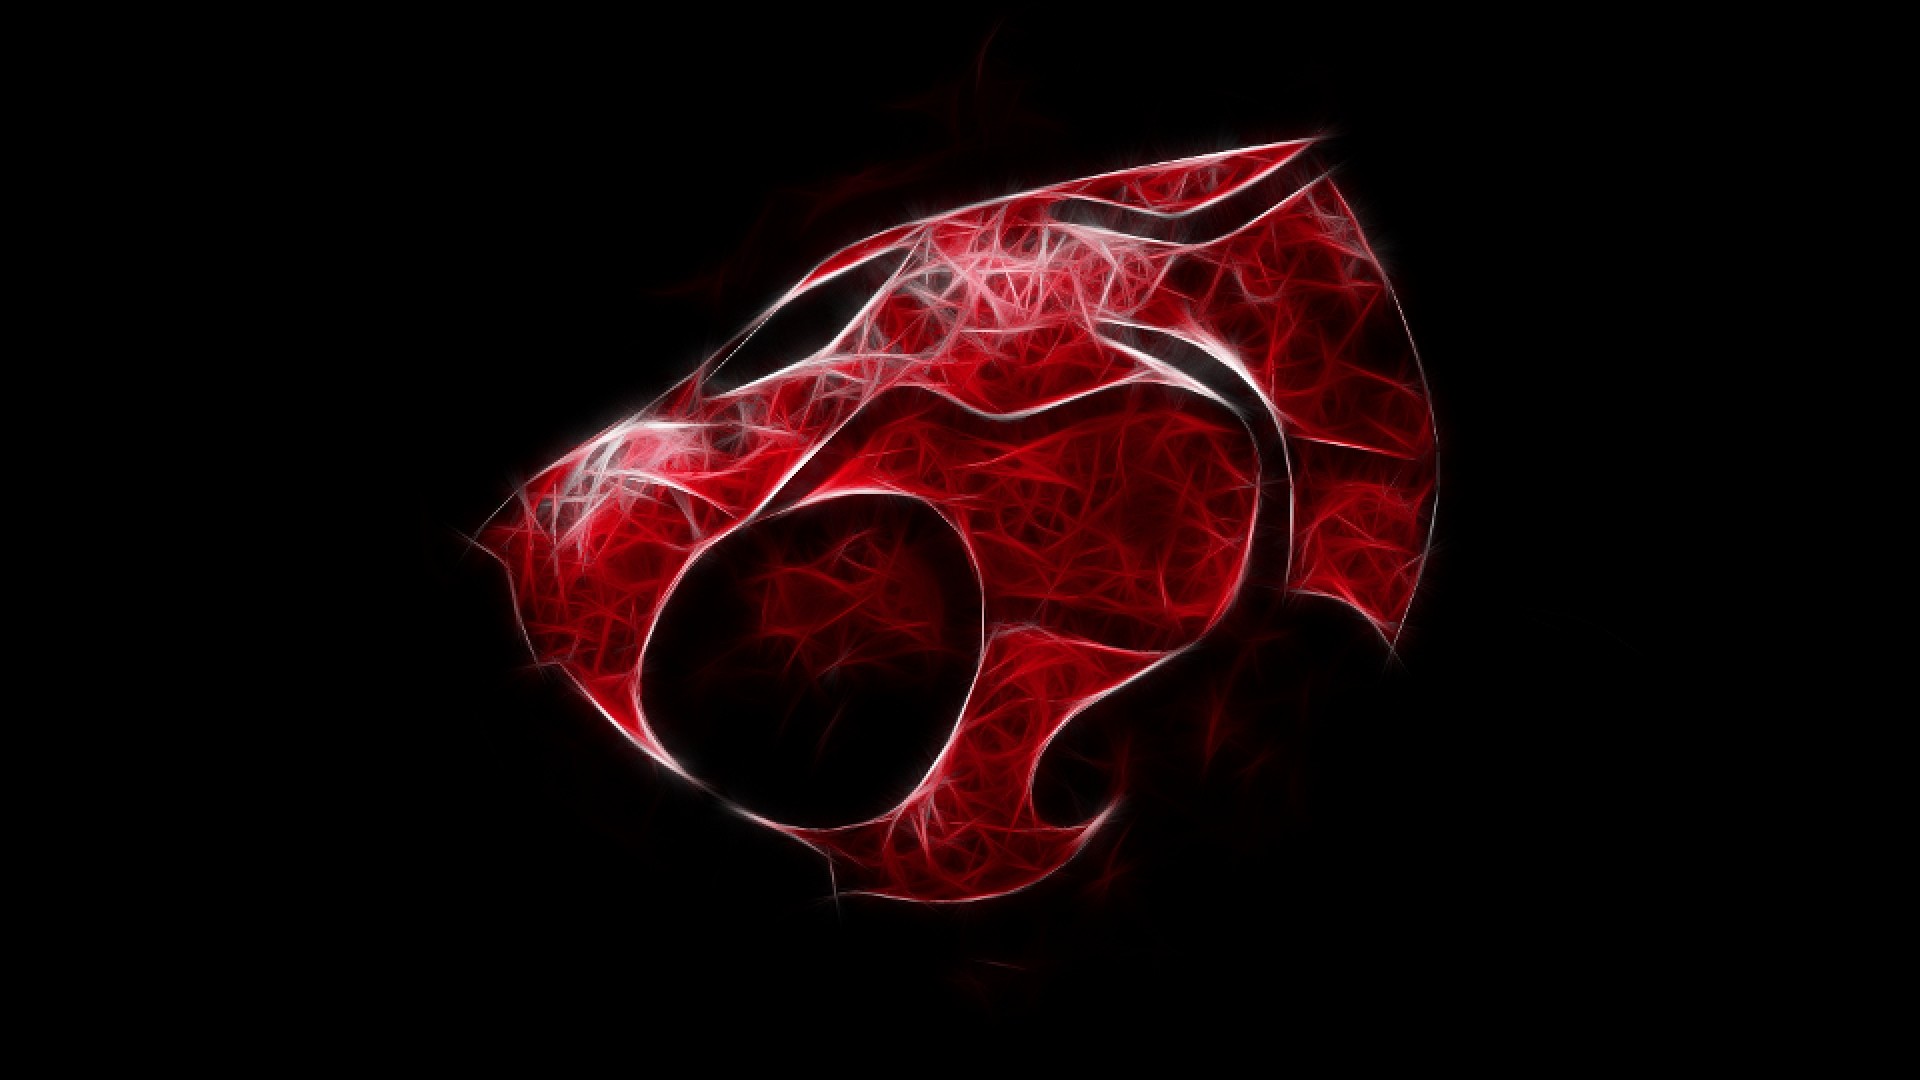 1920x1080 ... Thundercat Wallpapers - Wallpaper Cave thundercats Full HD Wallpaper  and Background |  ...